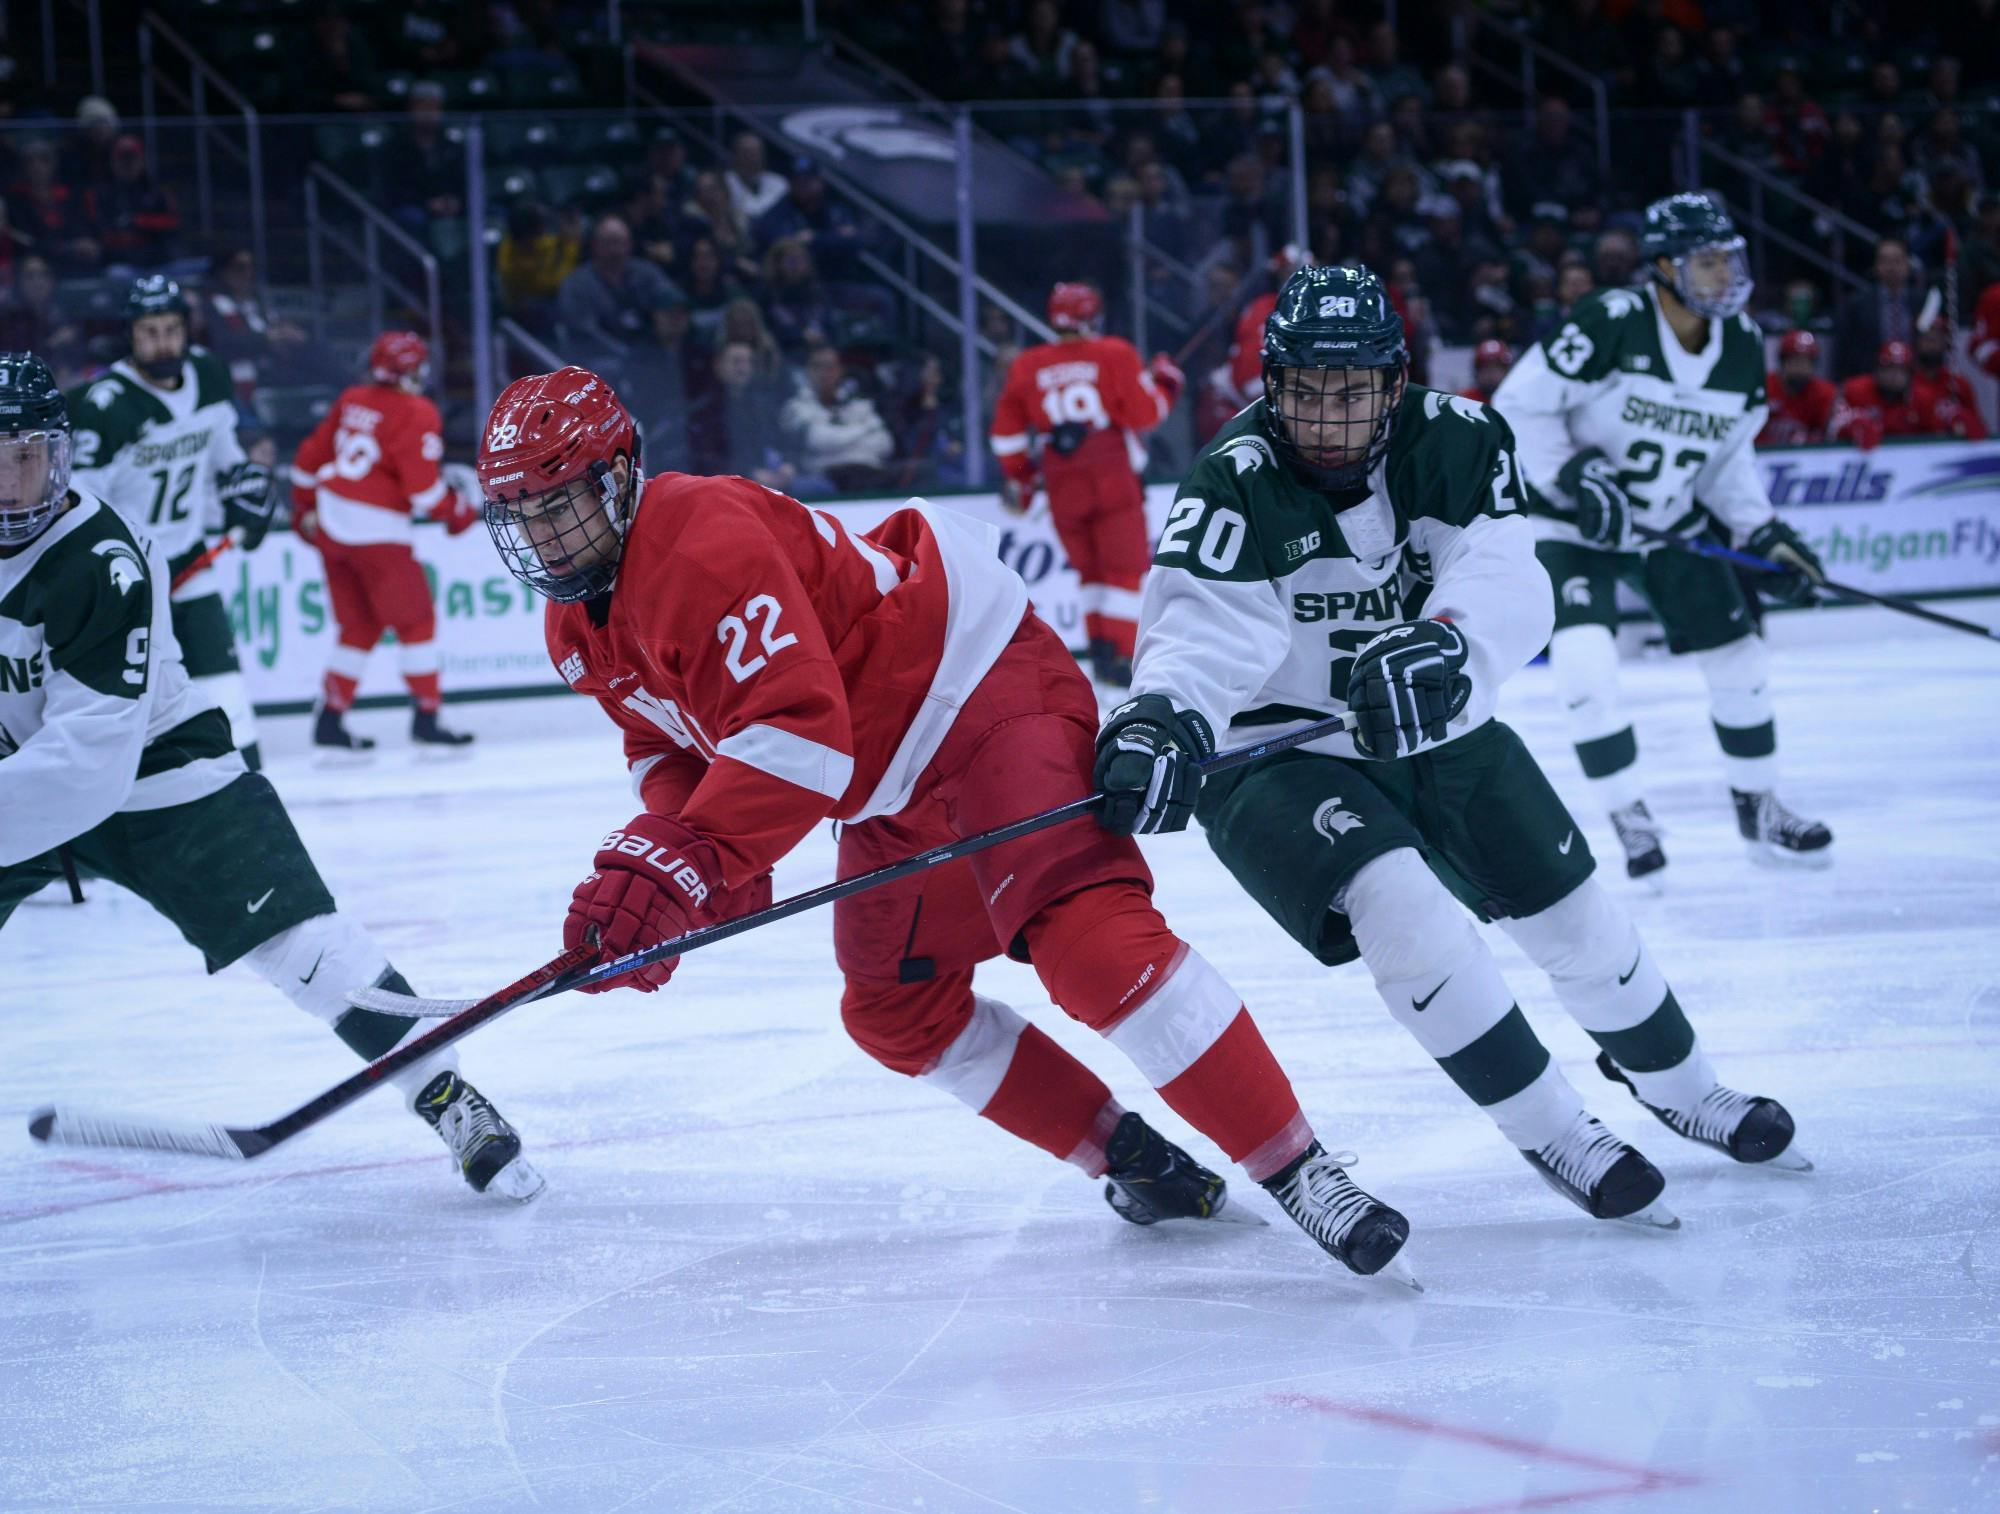 Freshman forward Josh Nodler (20) fights for the puck during the game against Cornell at Munn Ice Arena on Nov. 2, 2019. The Spartans lost to the Big Red, 6-2.